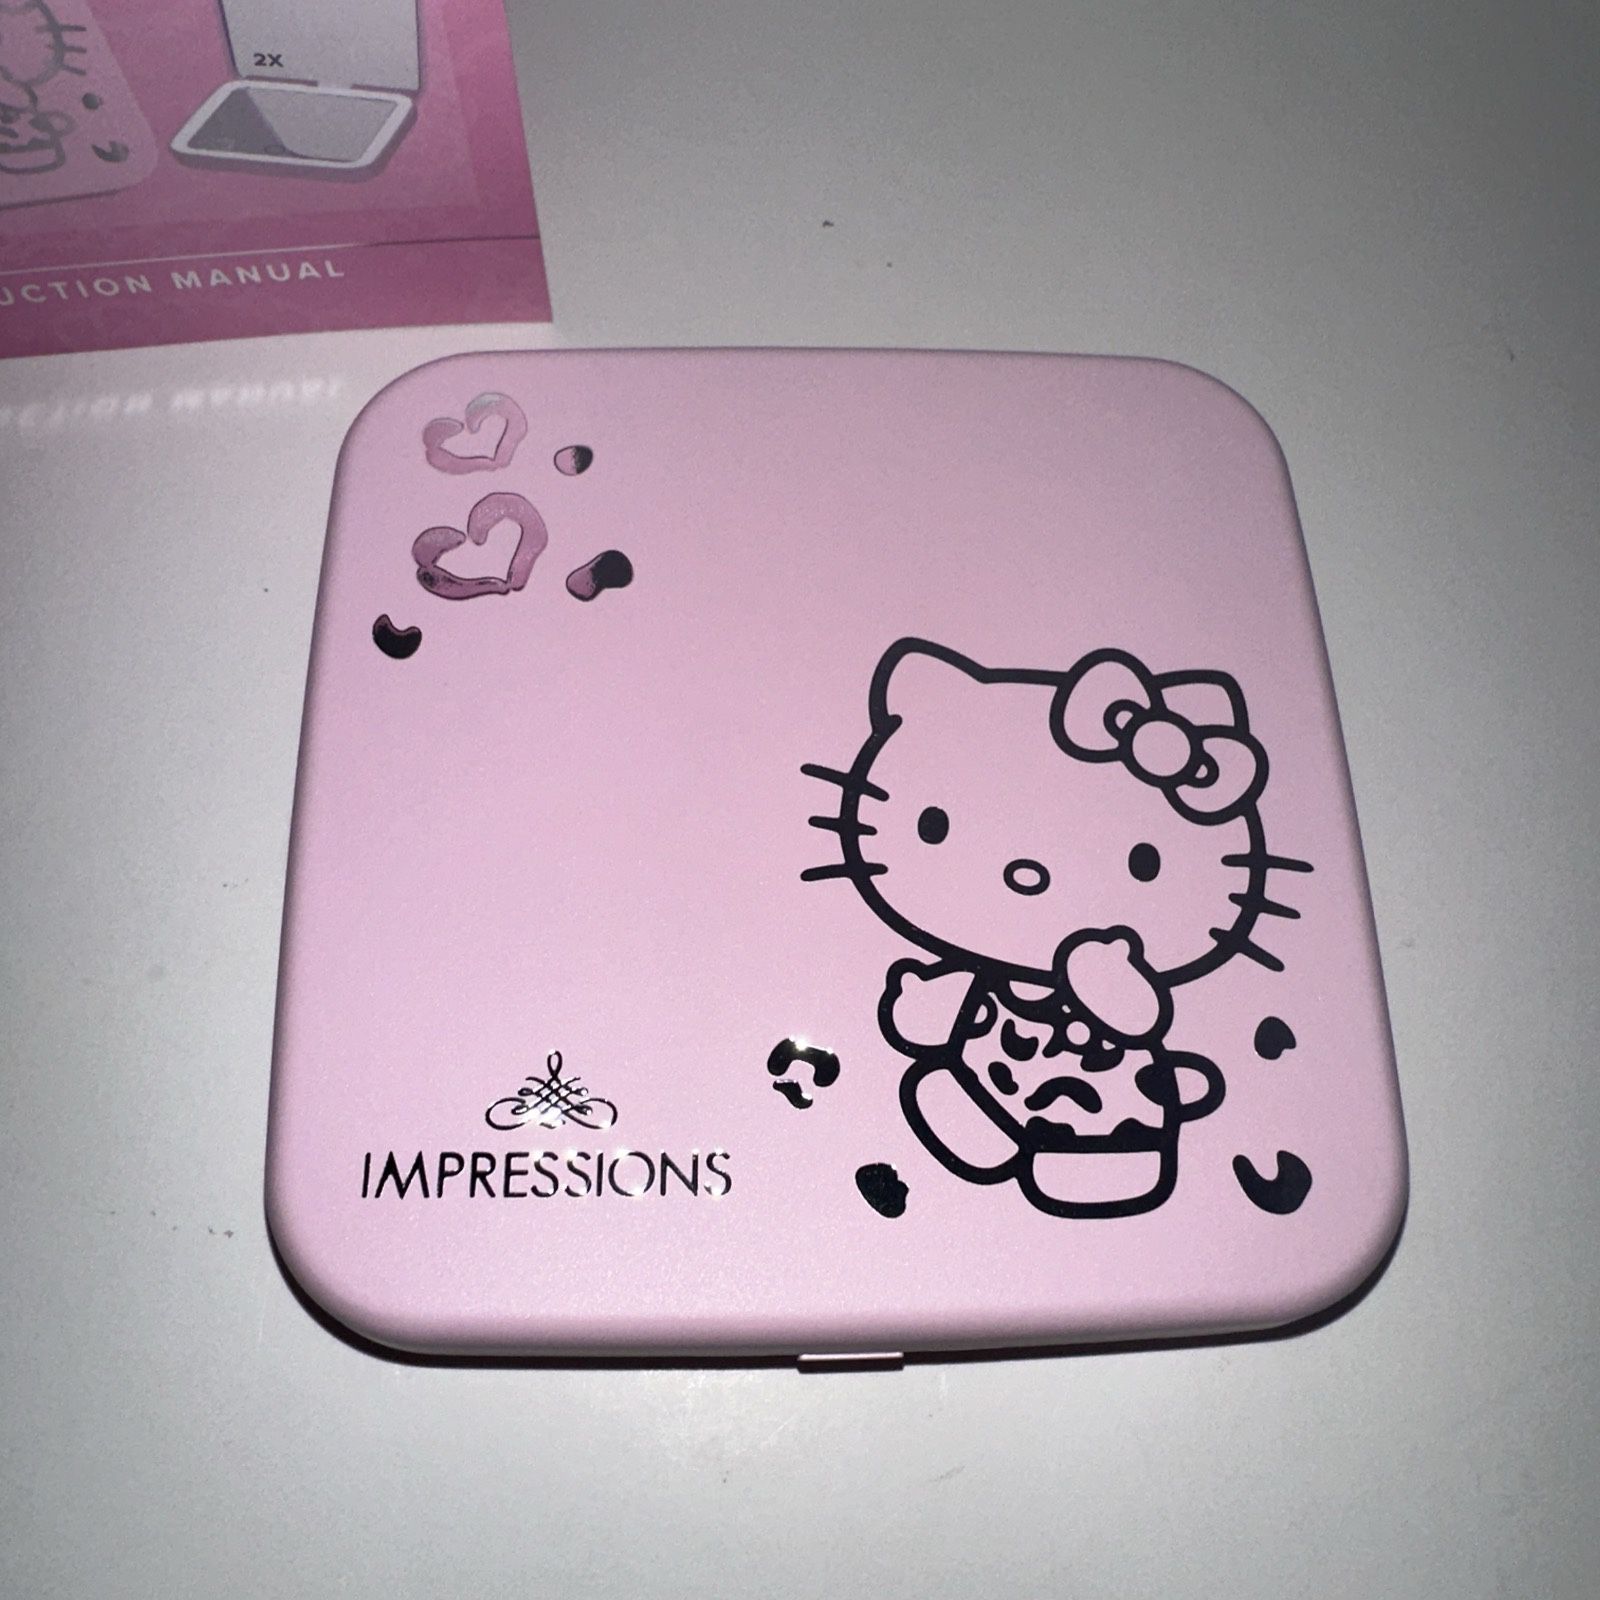 IMPRESSIONS HELLO KITTY COMPACT MIRROR WITH MAGNIFICATION AND LIGHT